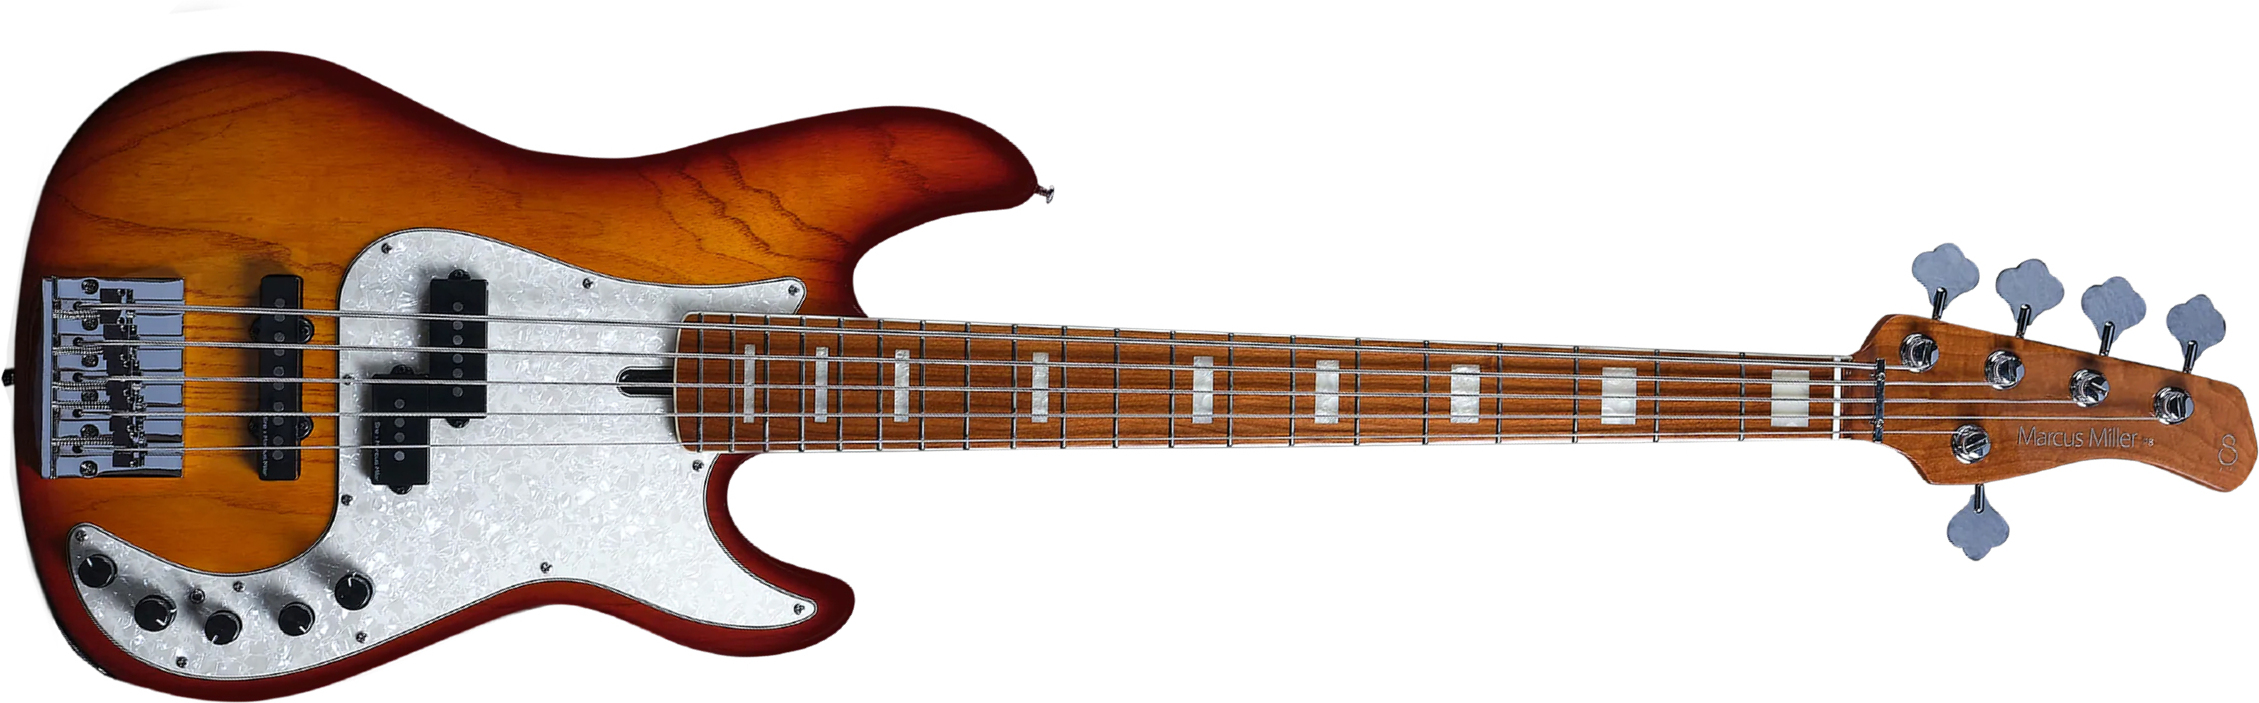 Marcus Miller P8 5st 5c Active Mn - Tobacco Sunburst - Solid body electric bass - Main picture